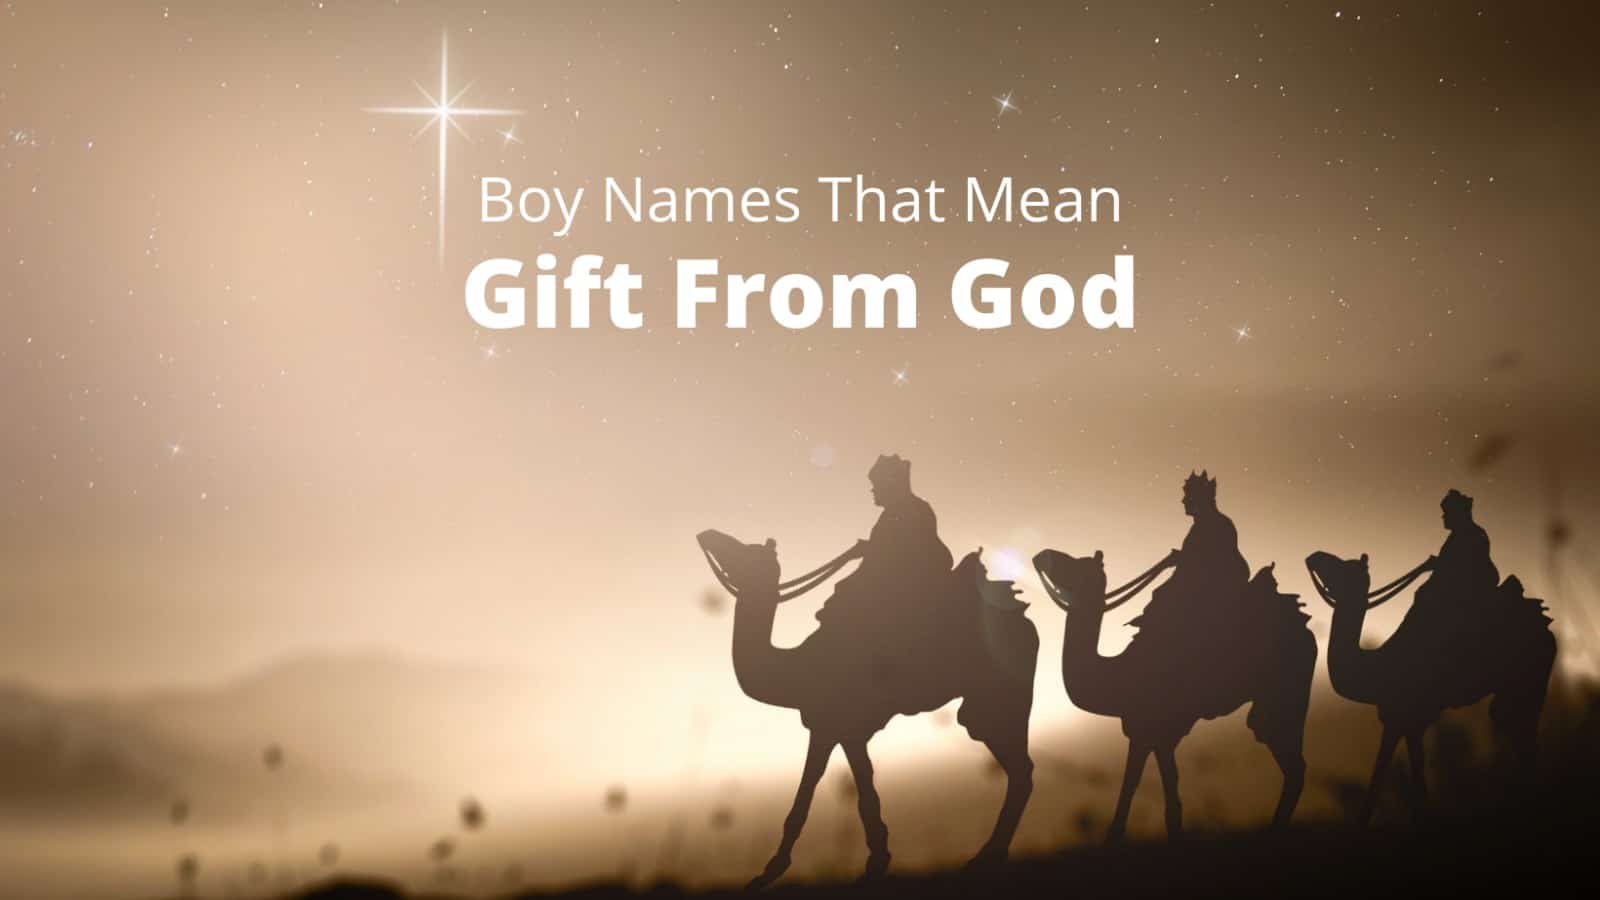 Boy Names That Mean Gift From God